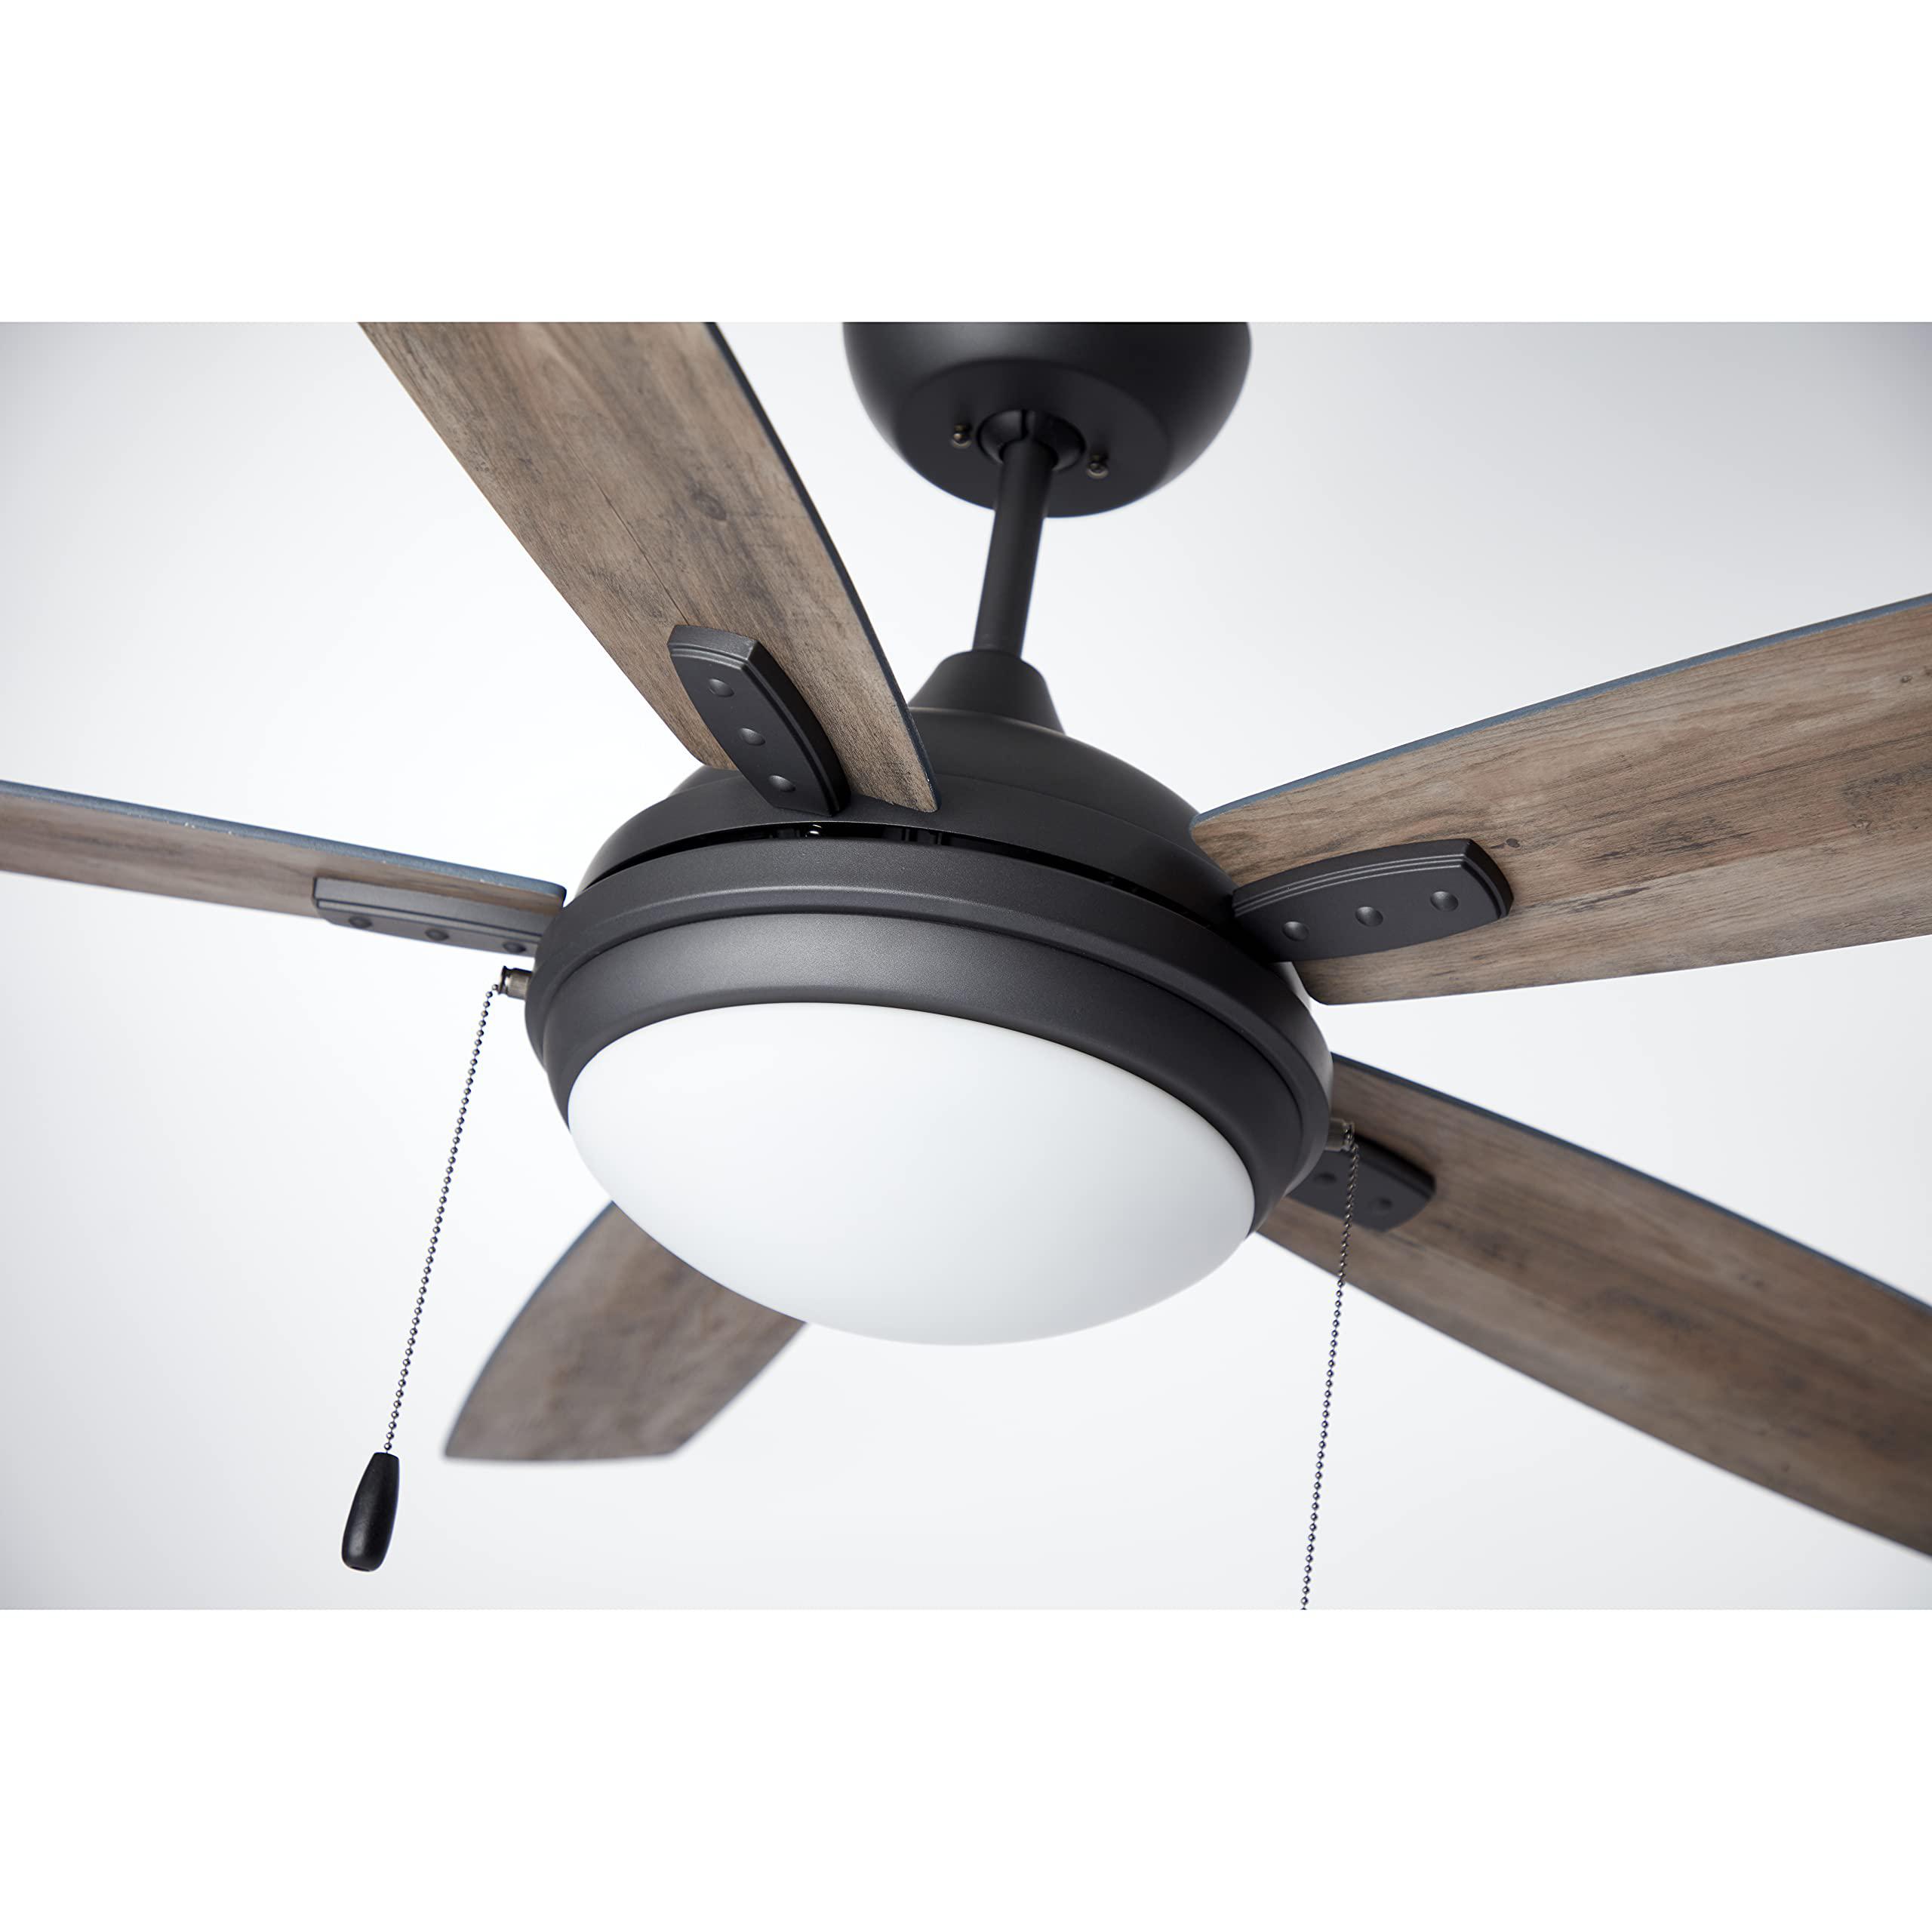 Luminance atticus 52 inch ceiling fan contemporary indoor fixture with integrated dimmable led lighting | includes 5 reversible gray/oa